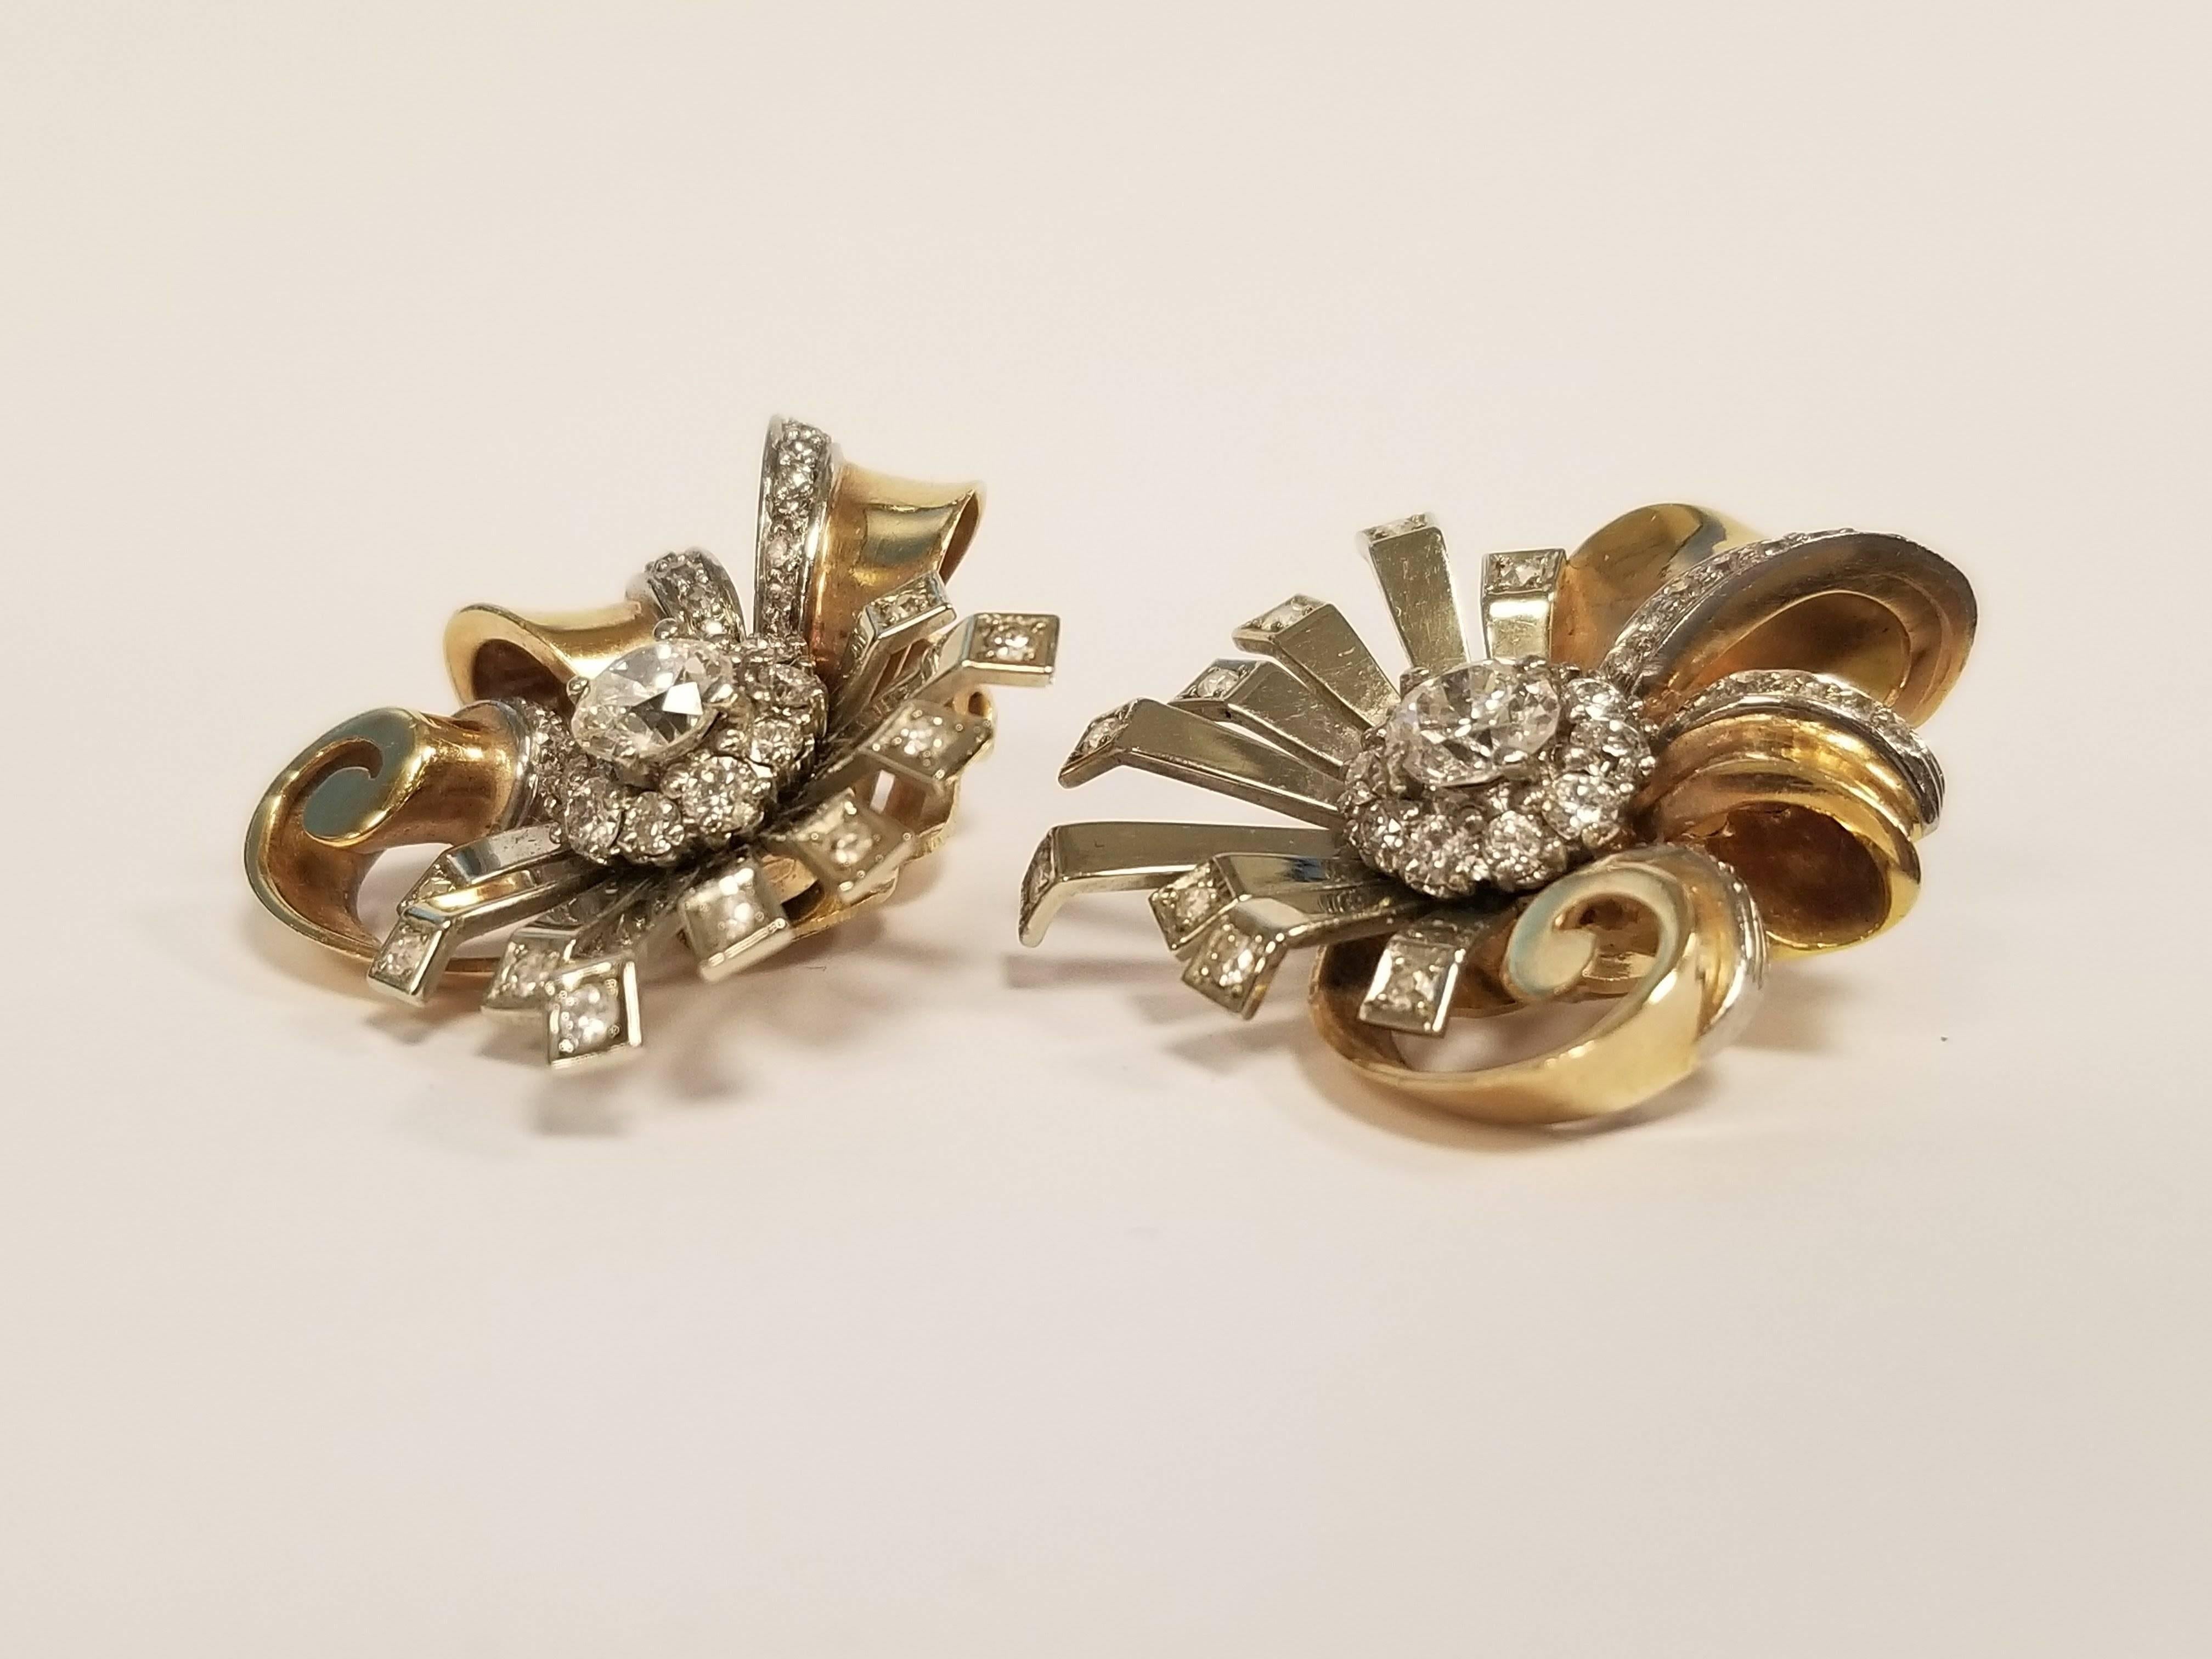 The festive verve of these Retro sunburst mixed metal earrings adorn the ear in dynamism. Exploding forth from a round-cut central diamond, each of its nine geometric arms of white gold appears as a ray of light, terminating with a single diamond,